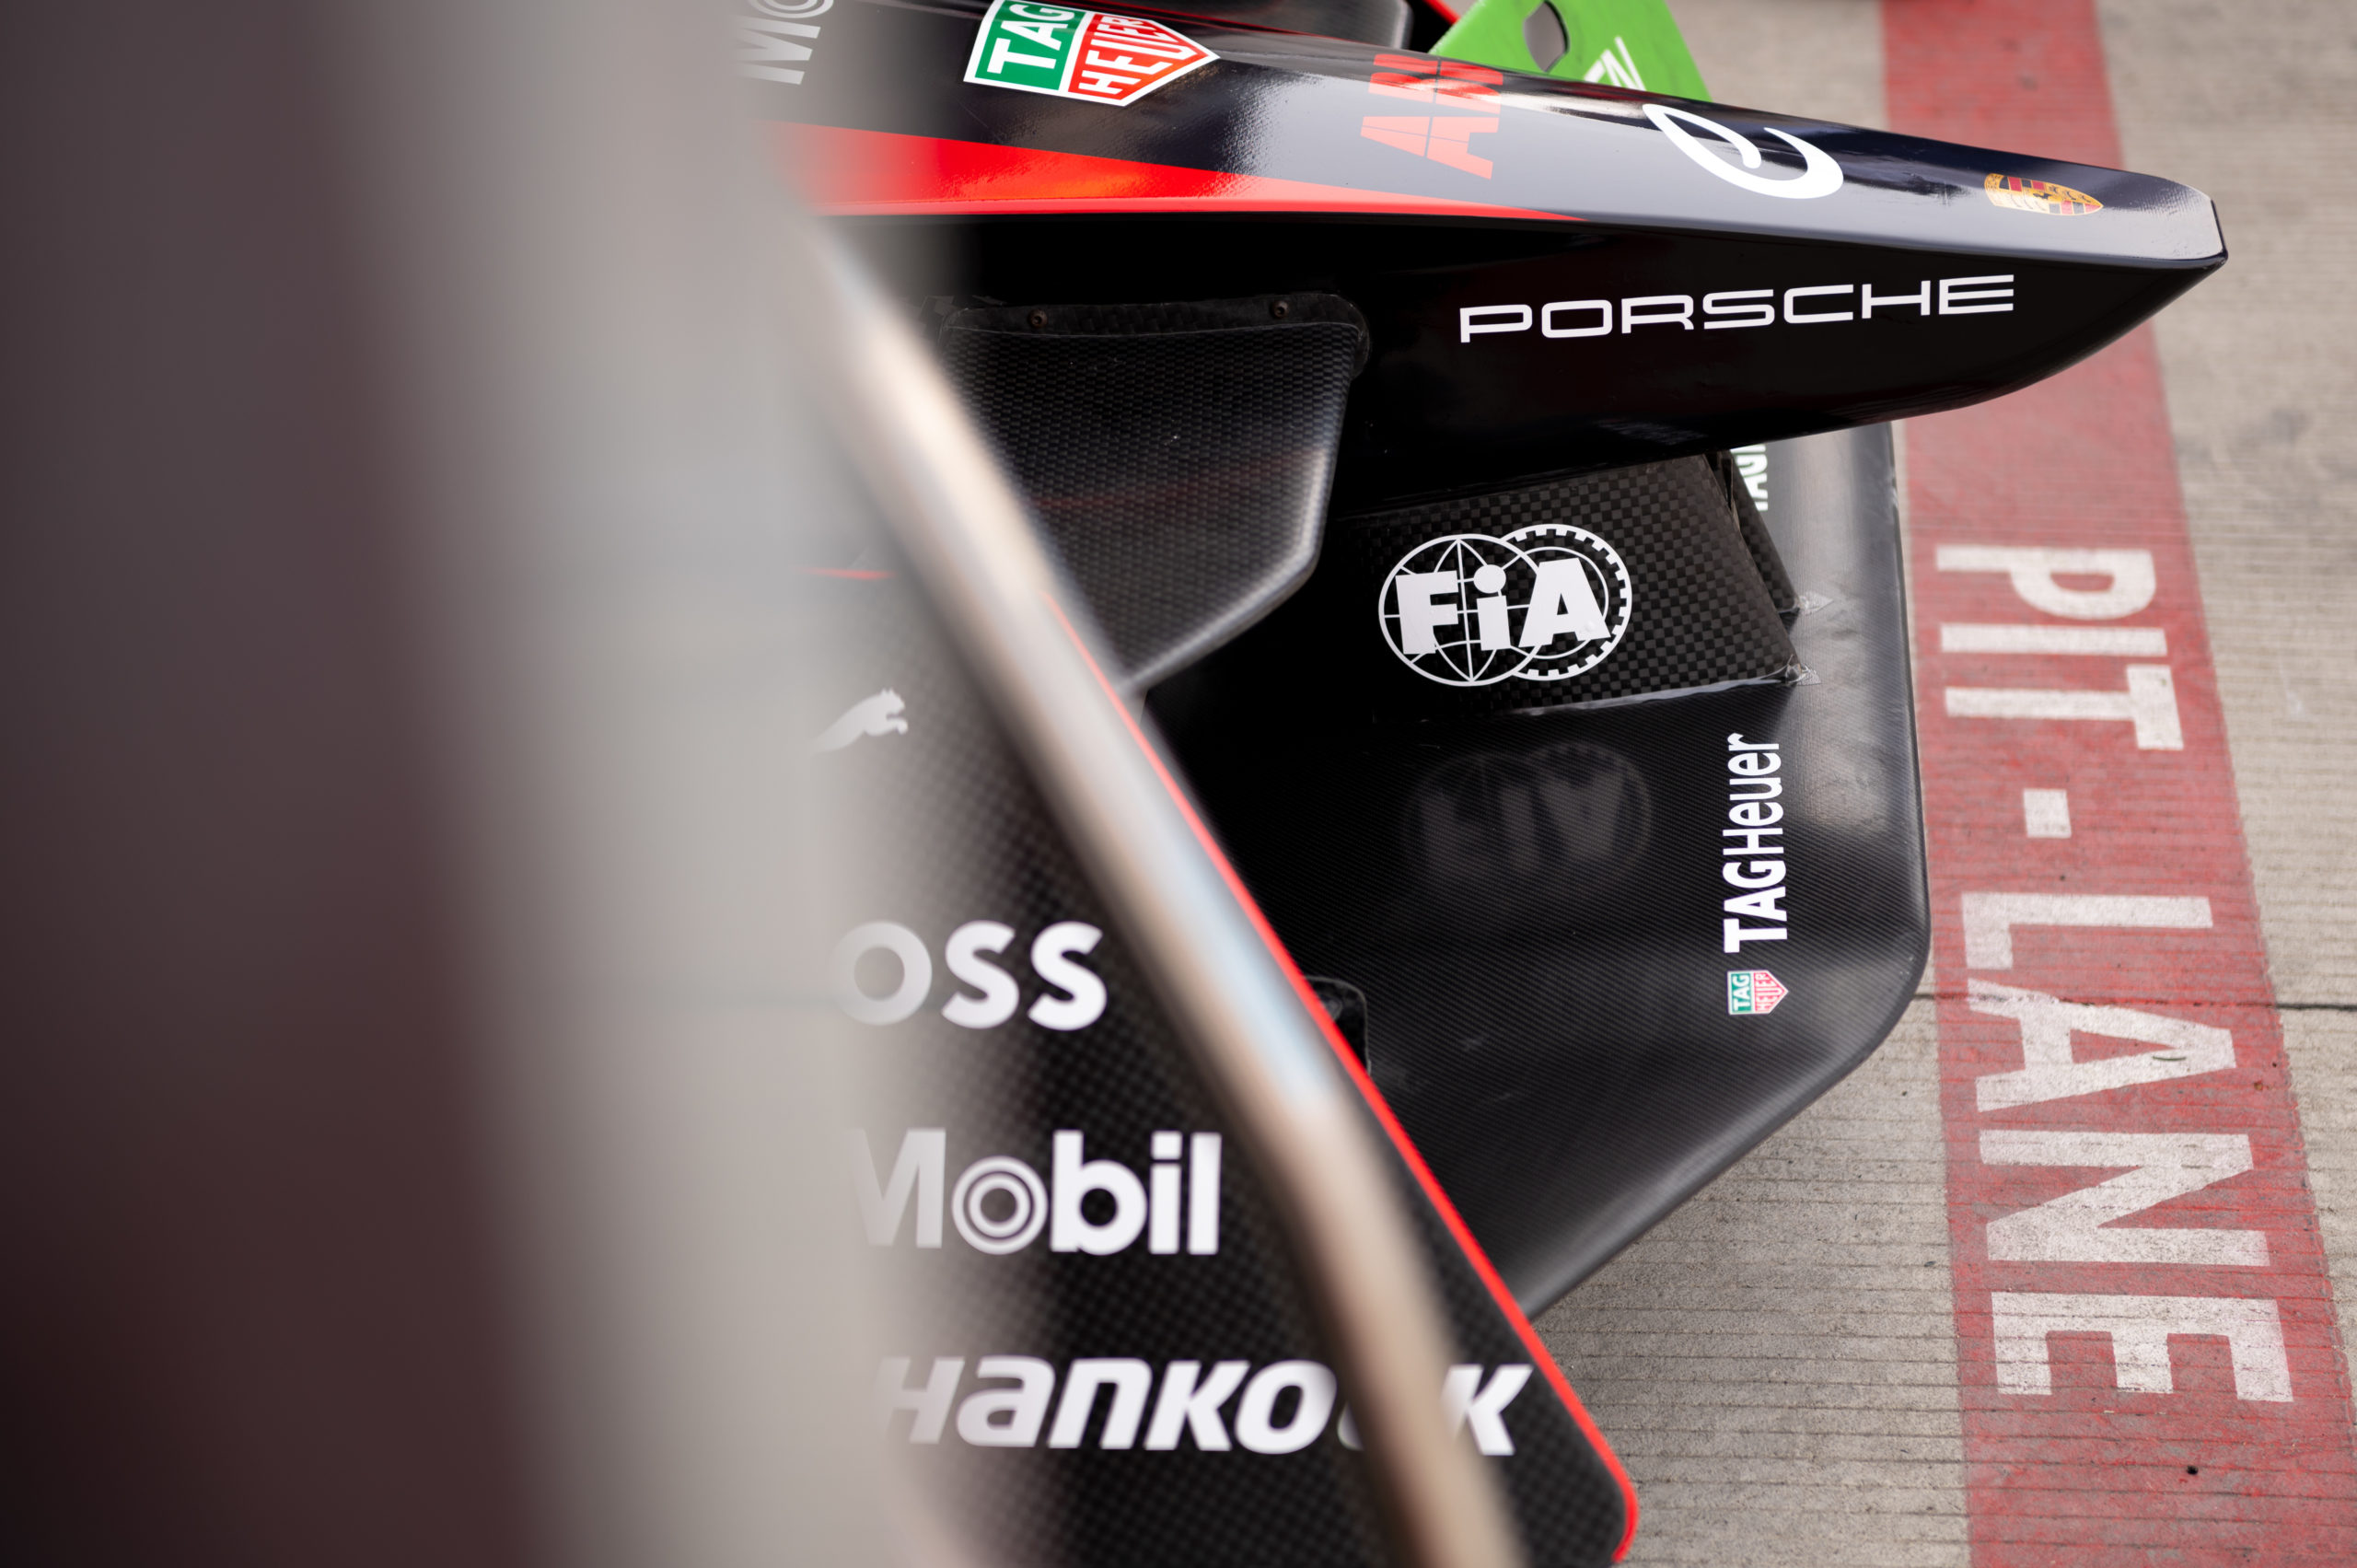 porsche commitment is big formula e win. but will others follow?